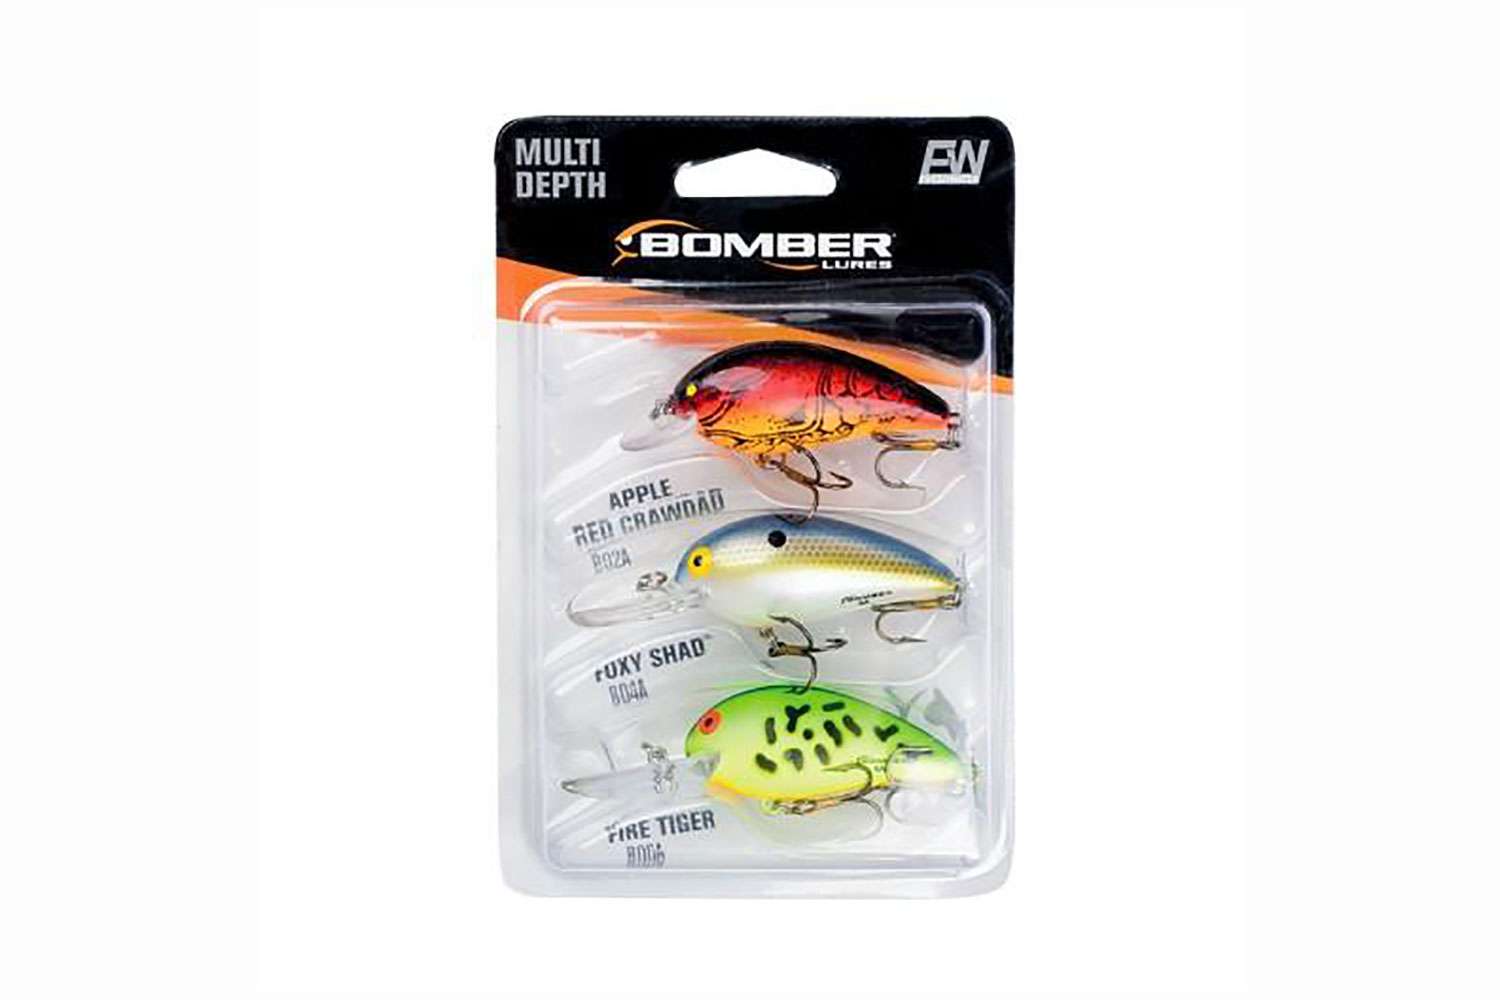 <p><b>Bomber Model A Kit</b></p>
The Model A kit comes equipped with three different size models built for cranking depths from 2 to over 8 feet deep. This kit is a perfect gift for any fisherman because it features crankbaits that cover a wide variety depths, especially for bank anglers.<br>
<p><b>MSRP: $13.49</b></p>
<a href=